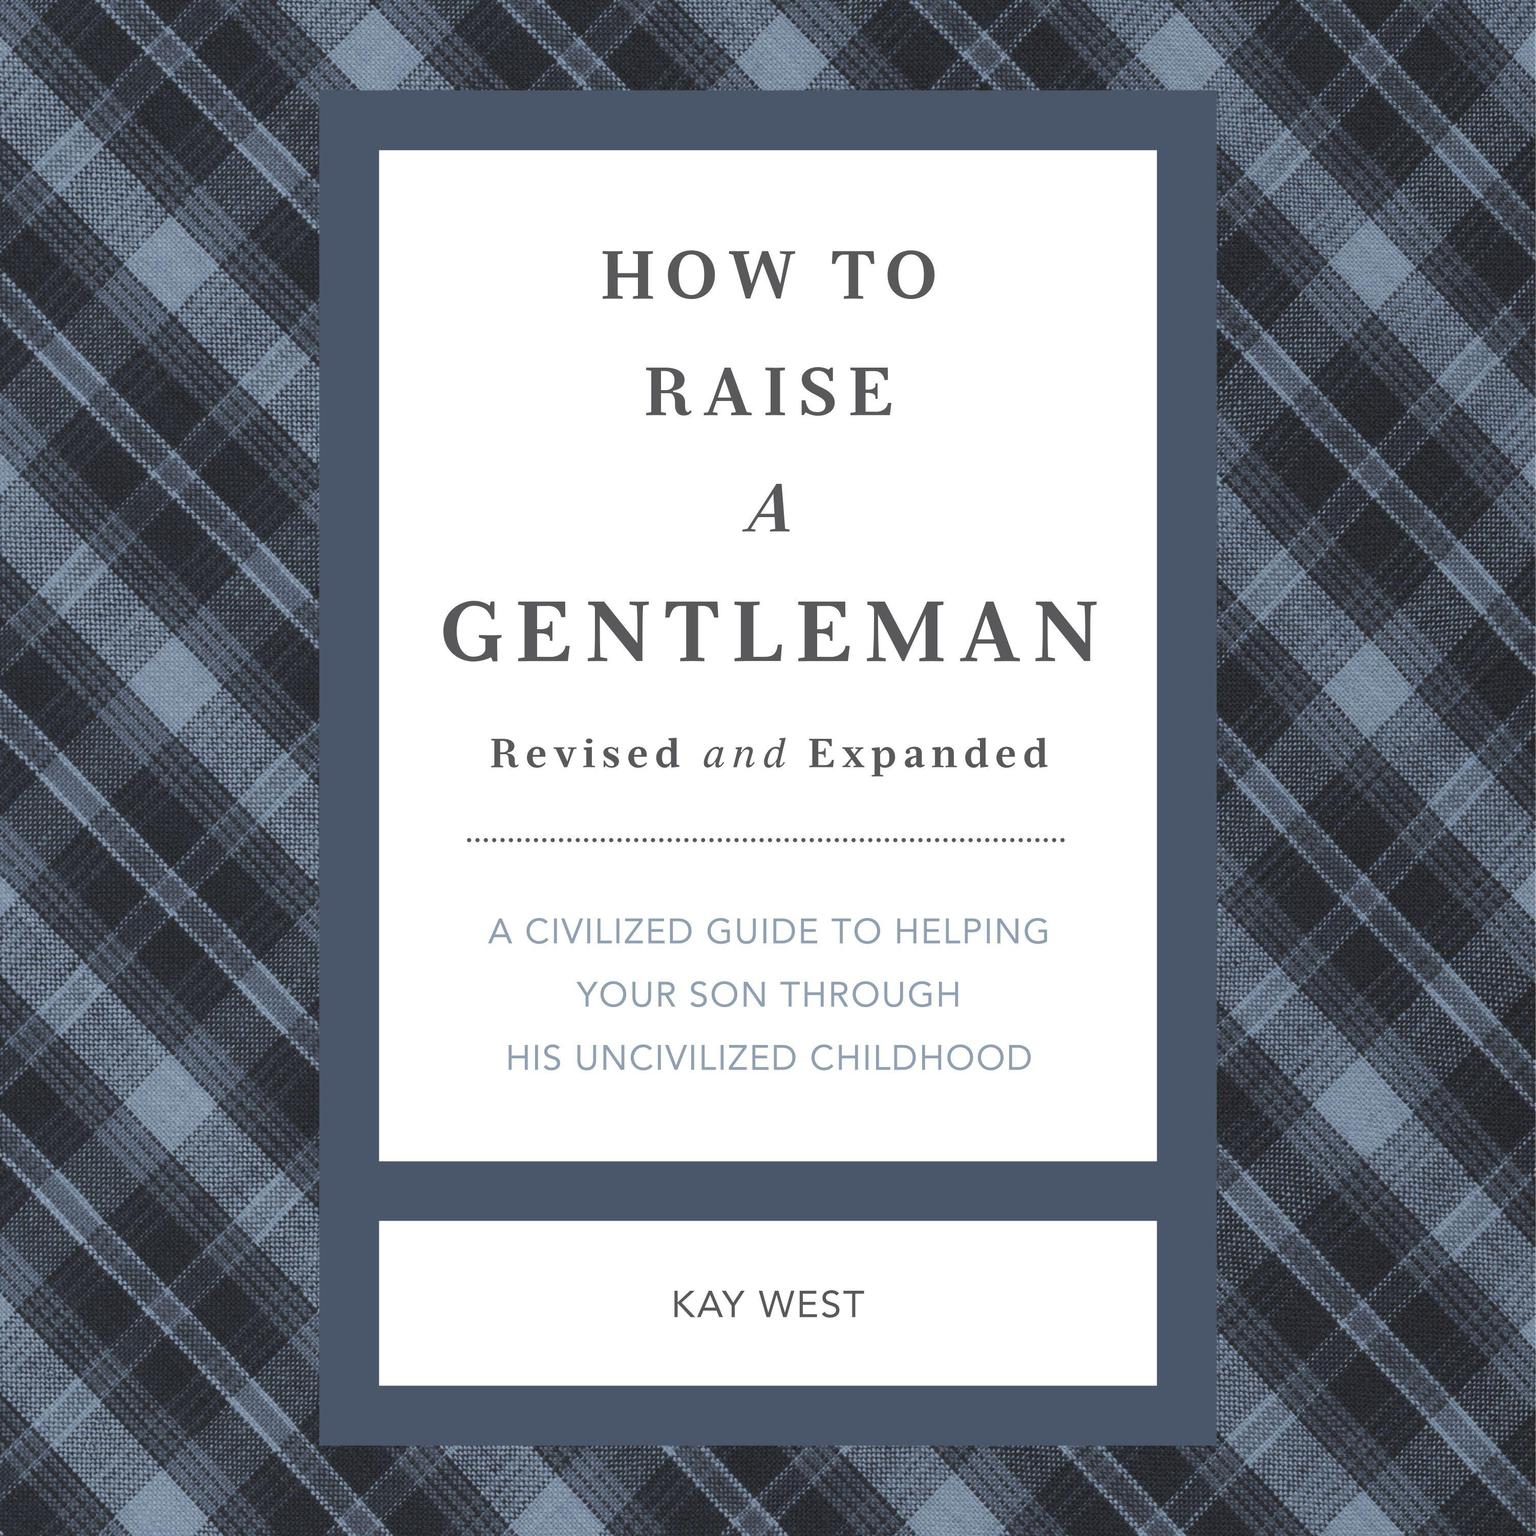 How to Raise a Gentleman Revised and Expanded: A Civilized Guide to Helping Your Son Through His Uncivilized Childhood Audiobook, by Kay West